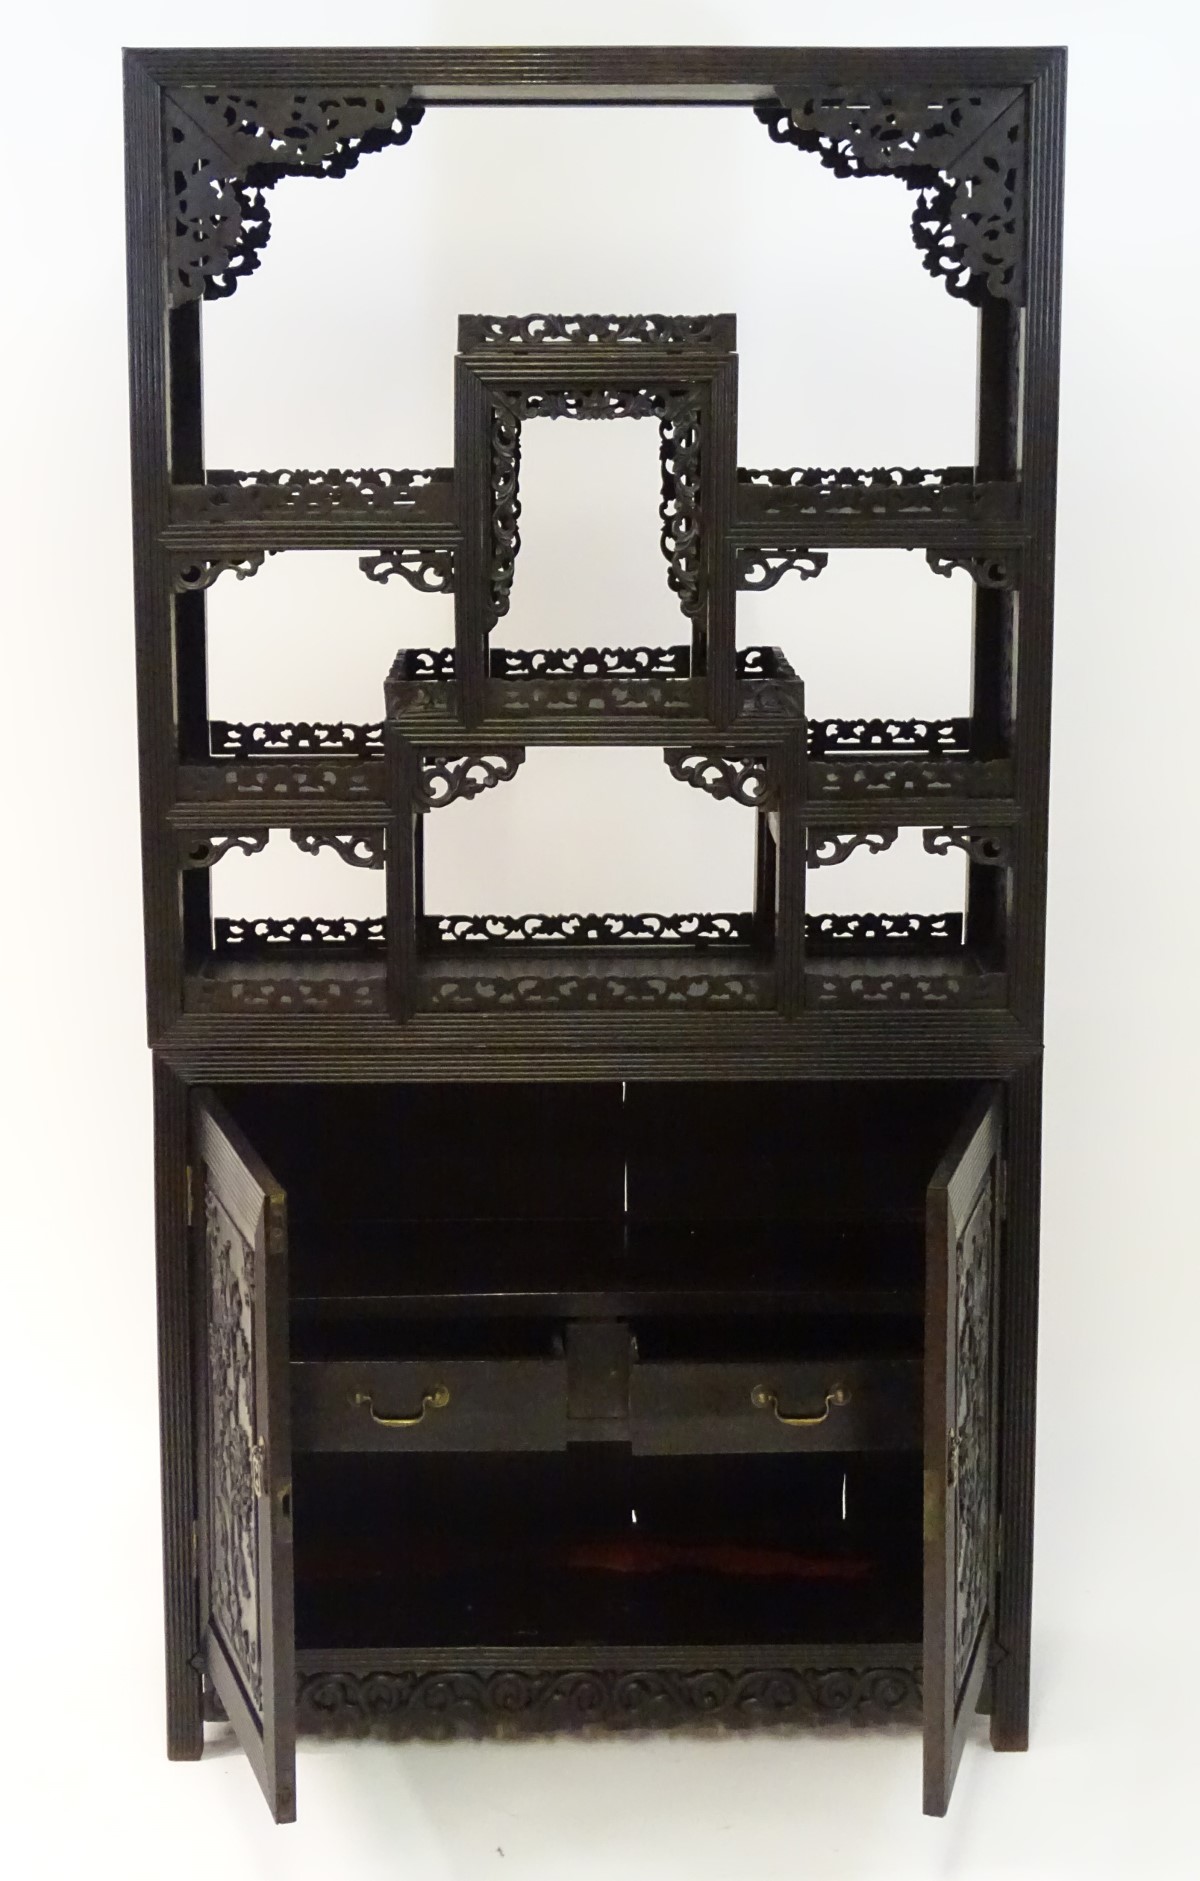 A late 19thC / early 20thC Chinese hardwood cabinet with open display shelves resting on a cupboard - Image 10 of 10